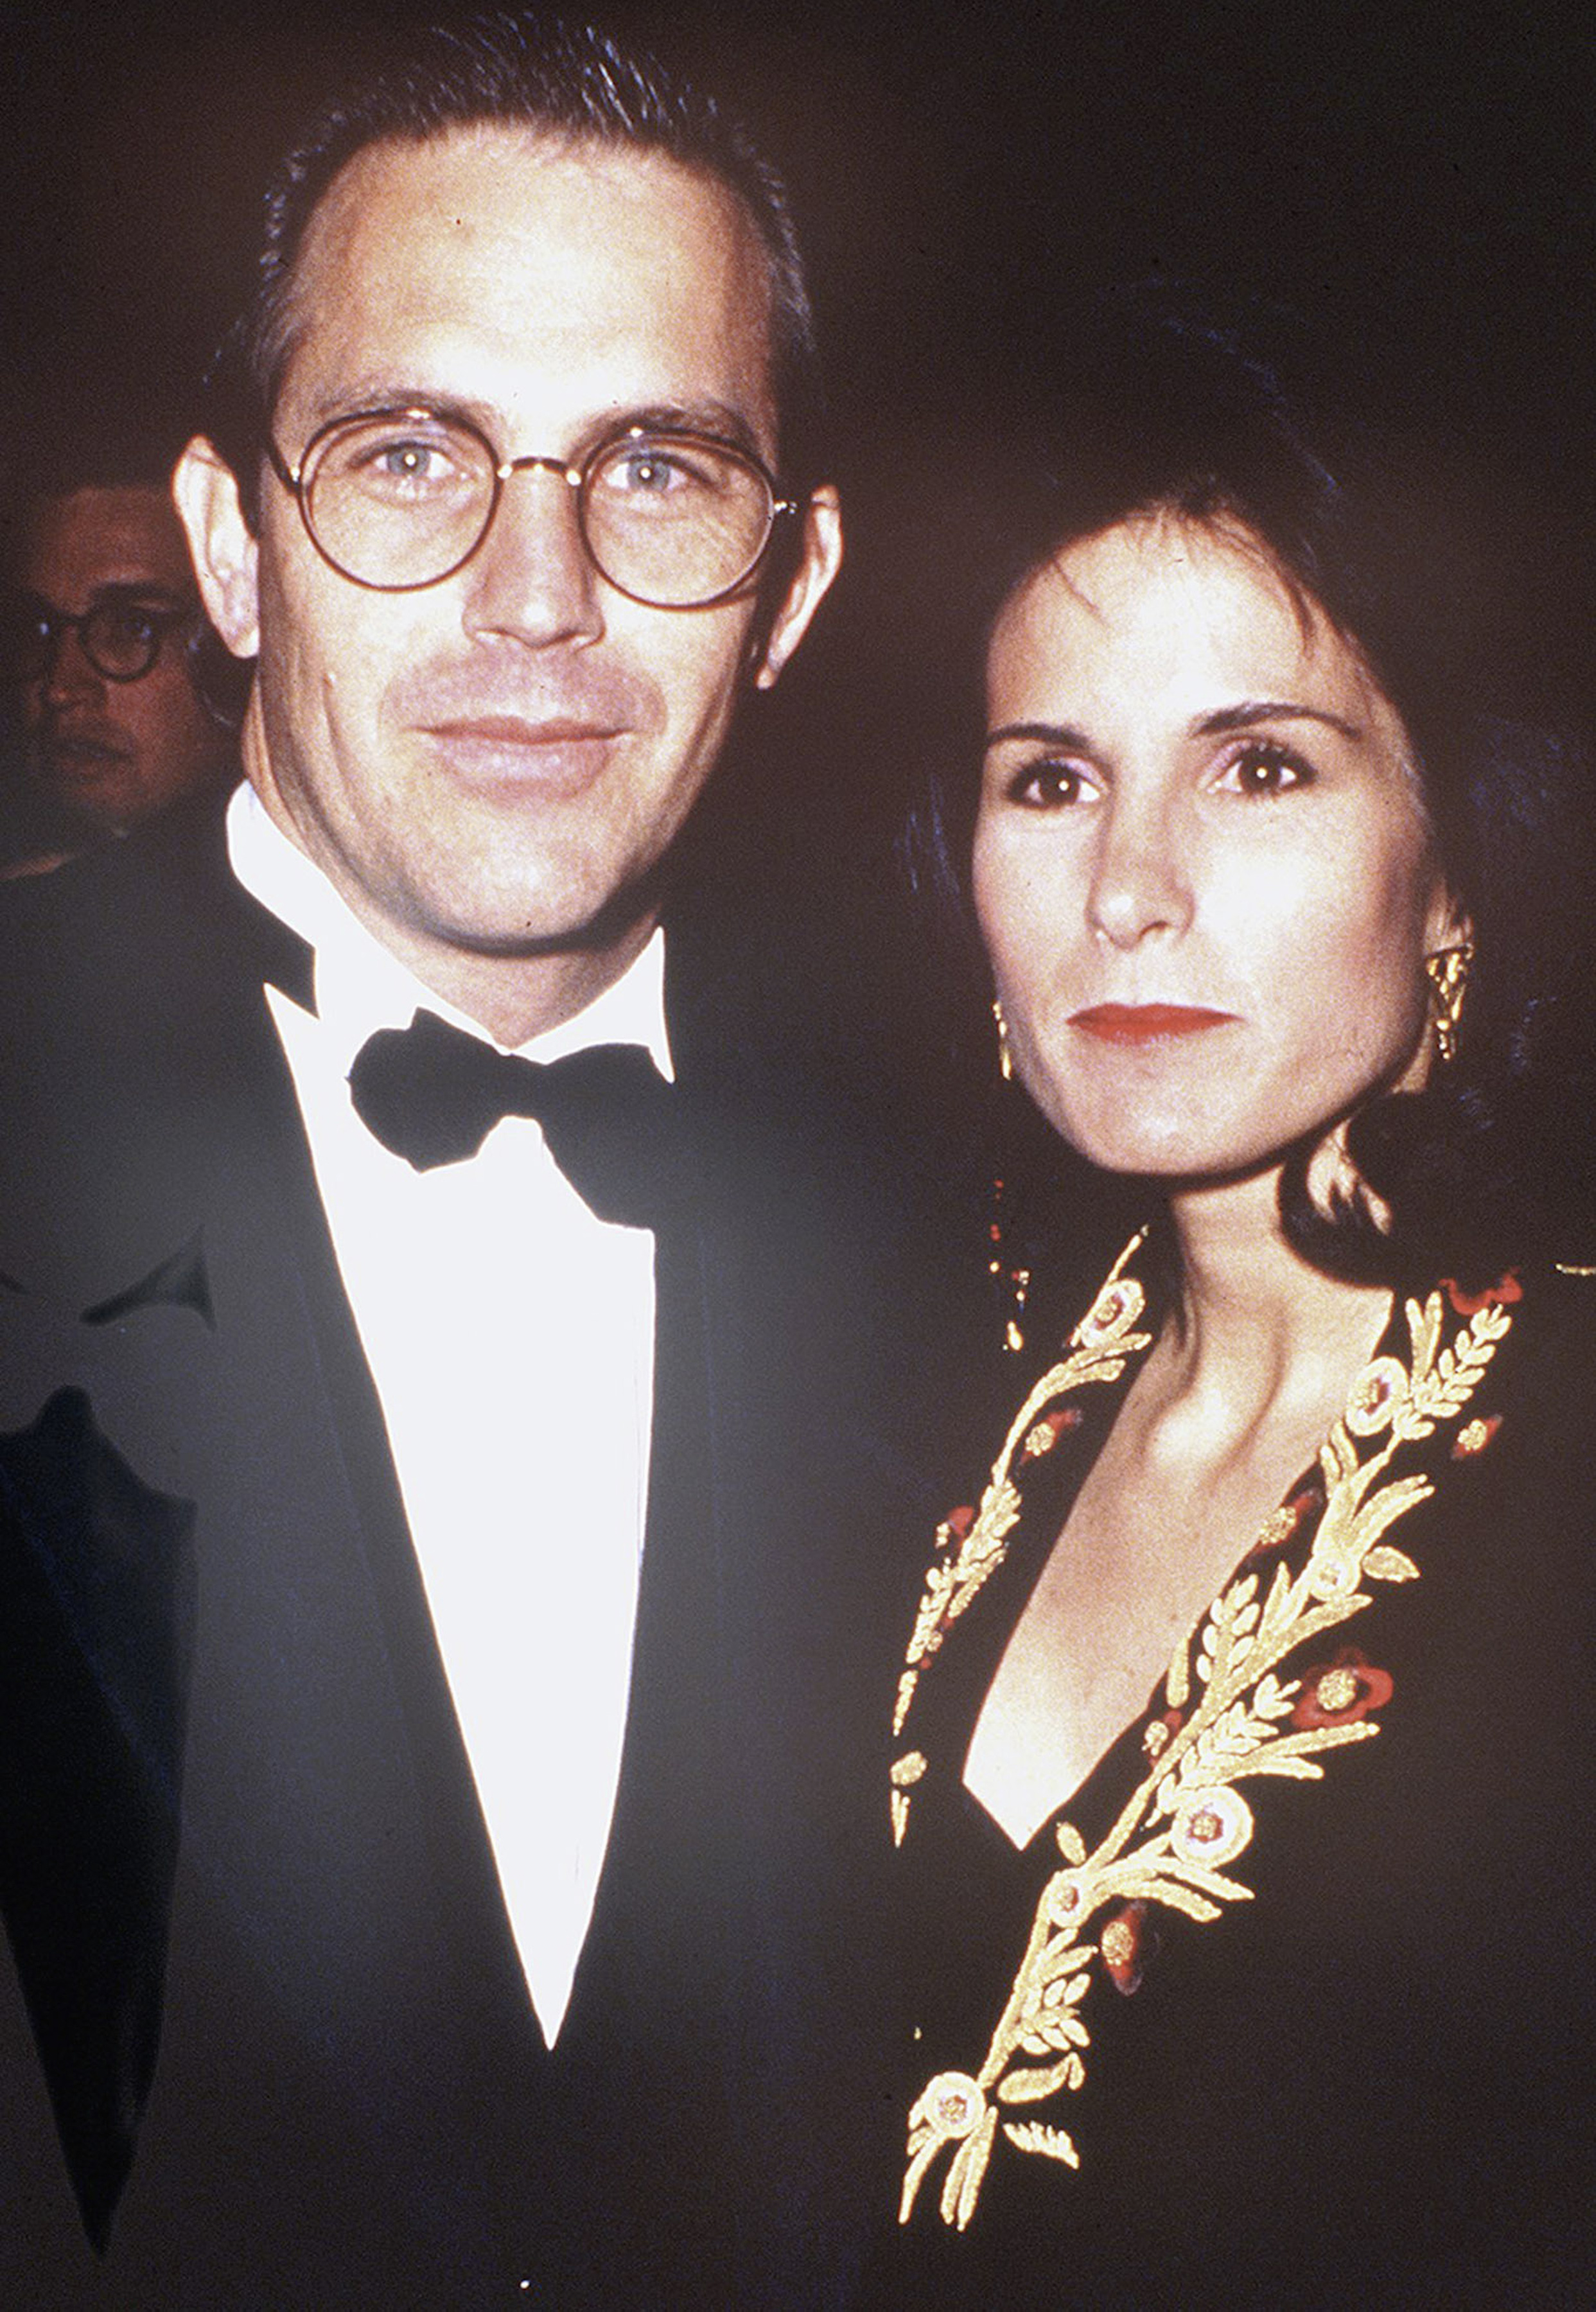 Kevin and Cindy Costner at the "Dances With Wolves" Los Angeles premiere in Los Angeles, California, on November 4, 1990 | Source: Getty Images